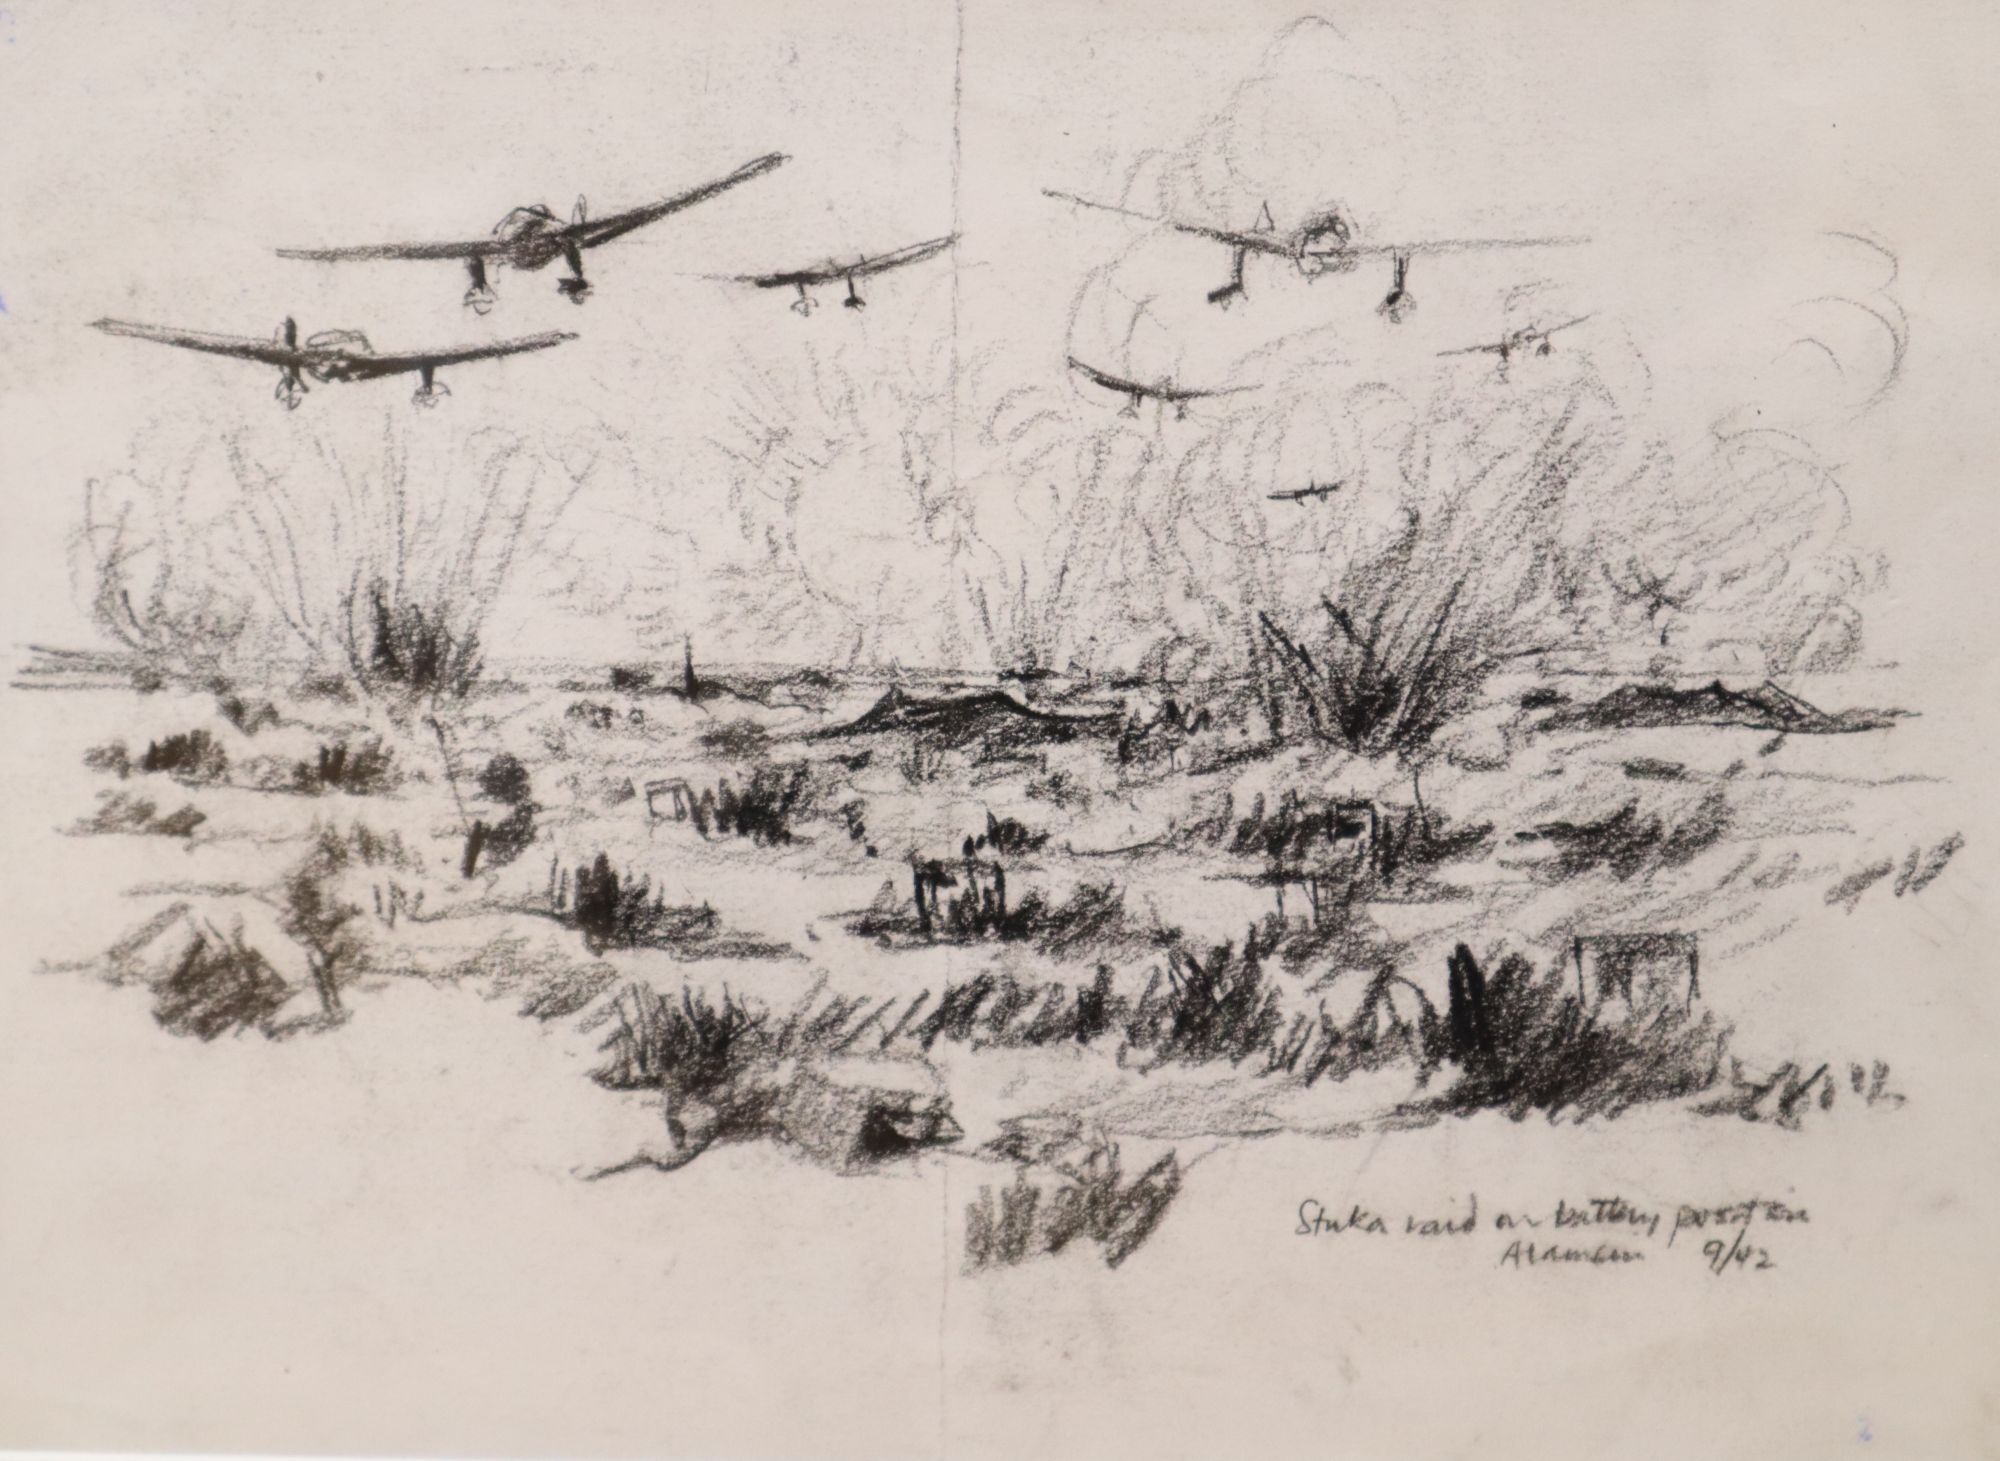 Cyril Mount (1920-2013), two drawings, Stuka raid on battery position, Alamein, 9/42 and Alamein Station, Waiting for the Leave Train t